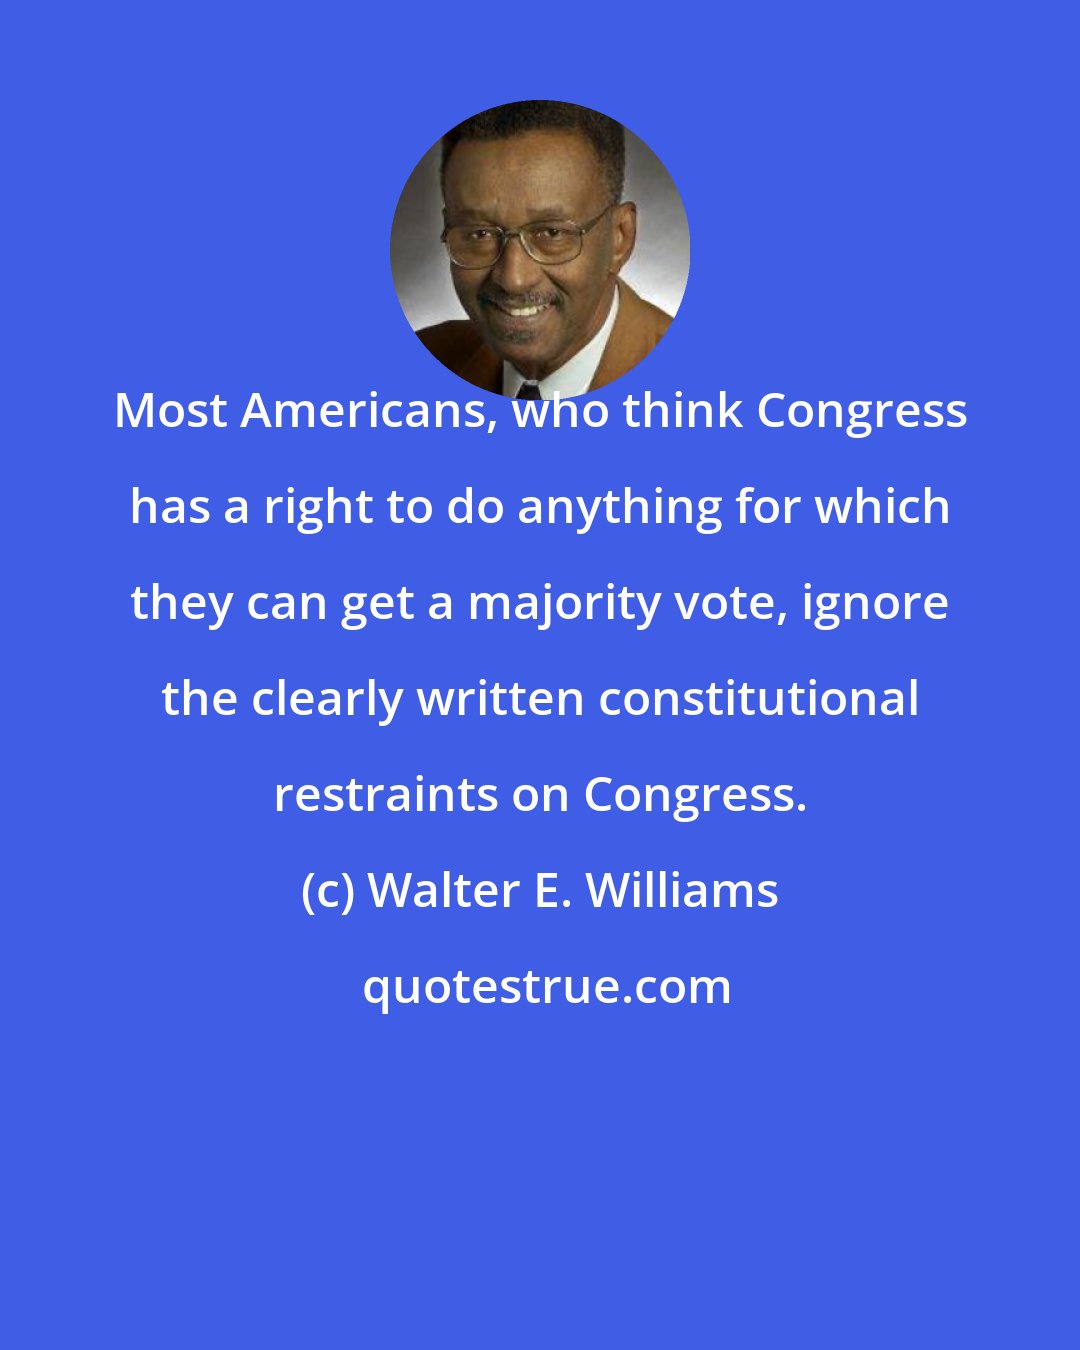 Walter E. Williams: Most Americans, who think Congress has a right to do anything for which they can get a majority vote, ignore the clearly written constitutional restraints on Congress.